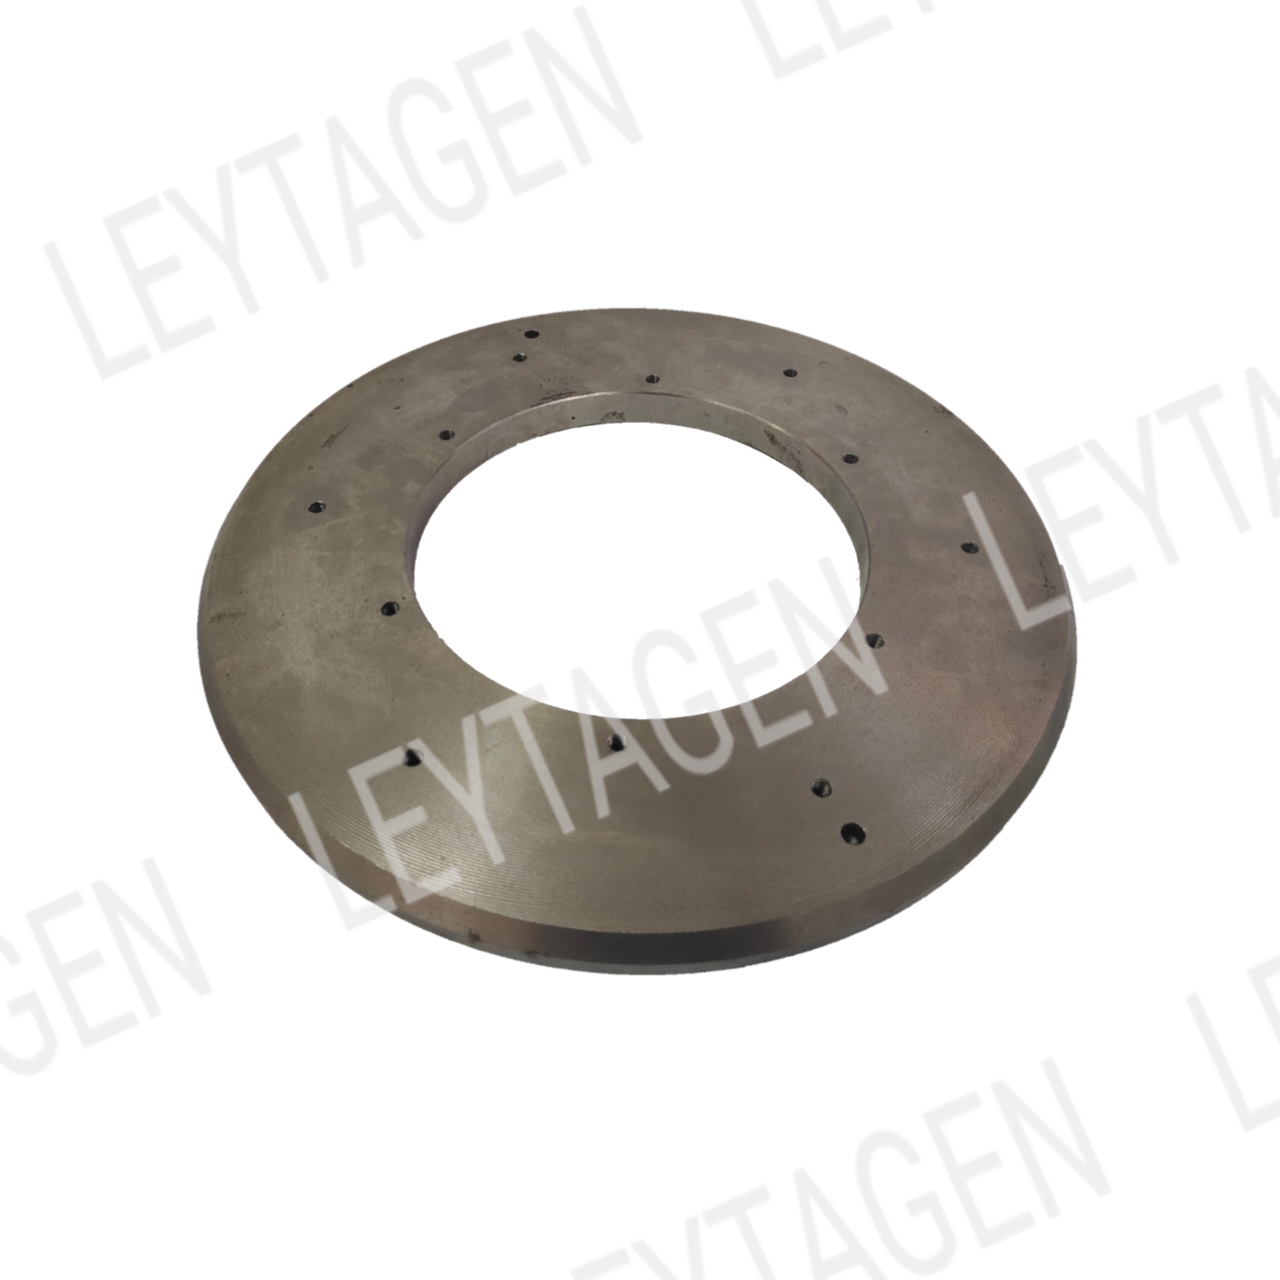 14 INCH, 355 mm FACE PLATE 19mm THICKNESS (LG/AL/CAK355/FP/118)